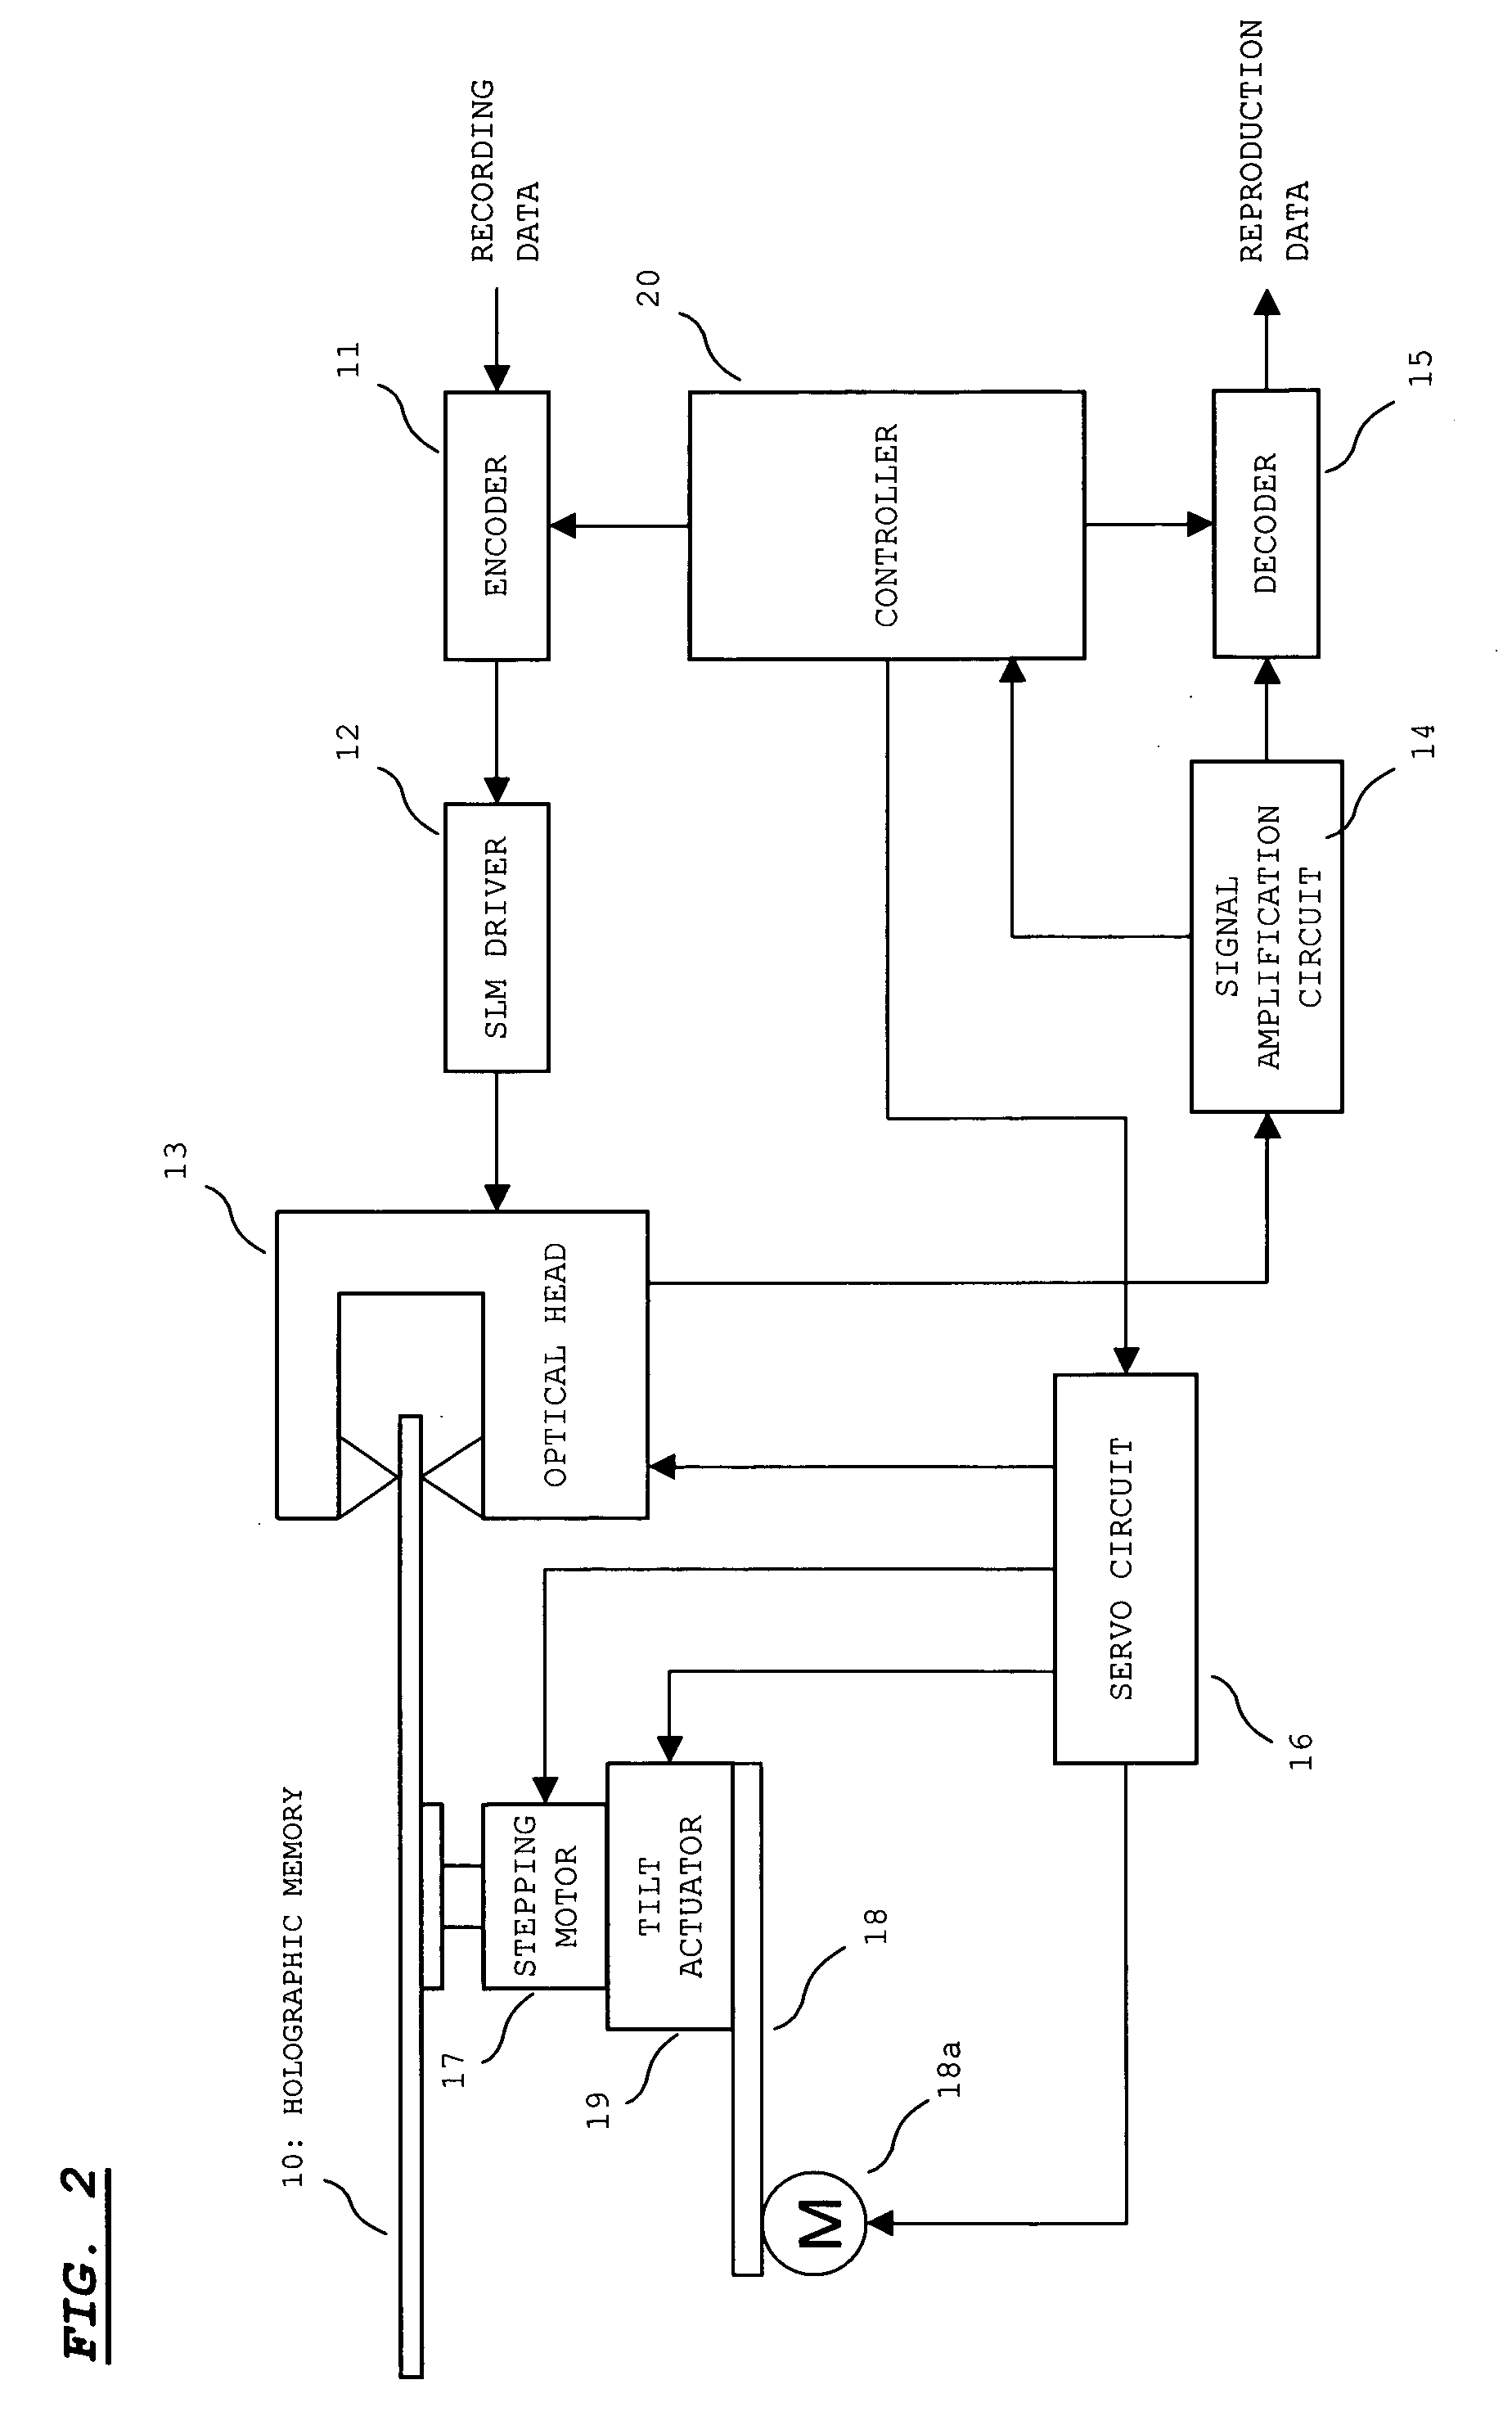 Holographic memory medium, holographic memory device and holographic recording device